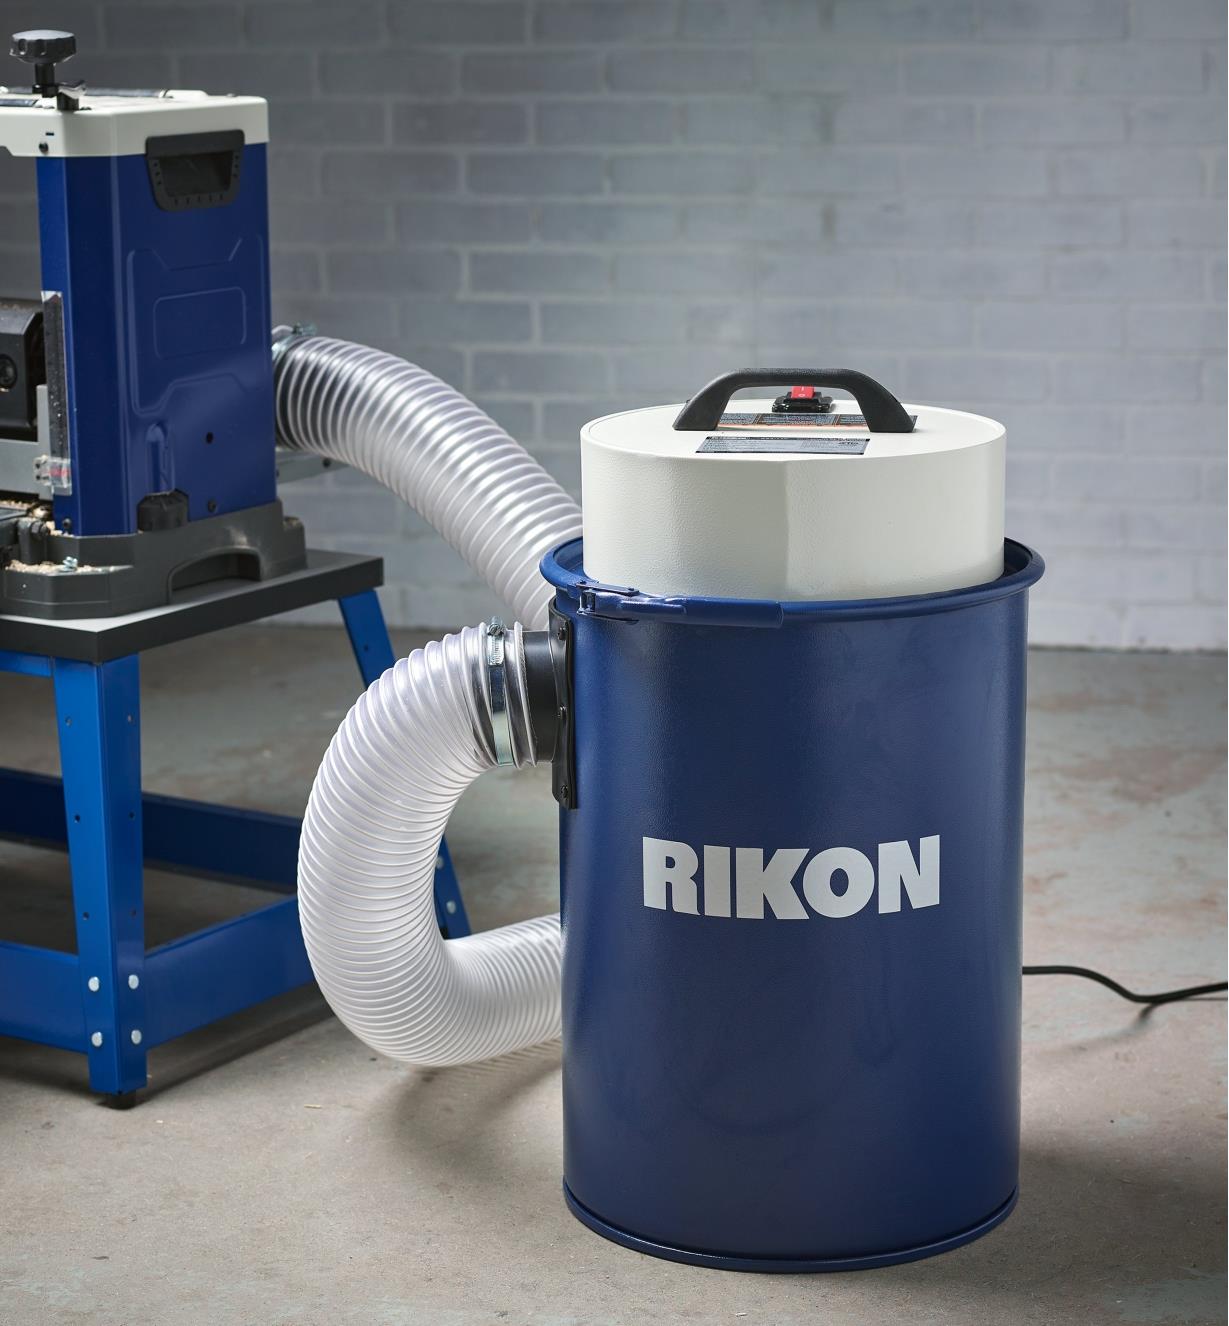 A Rikon 12 gallon dust extractor connected with a 4” diameter hose to a Rikon helical planer